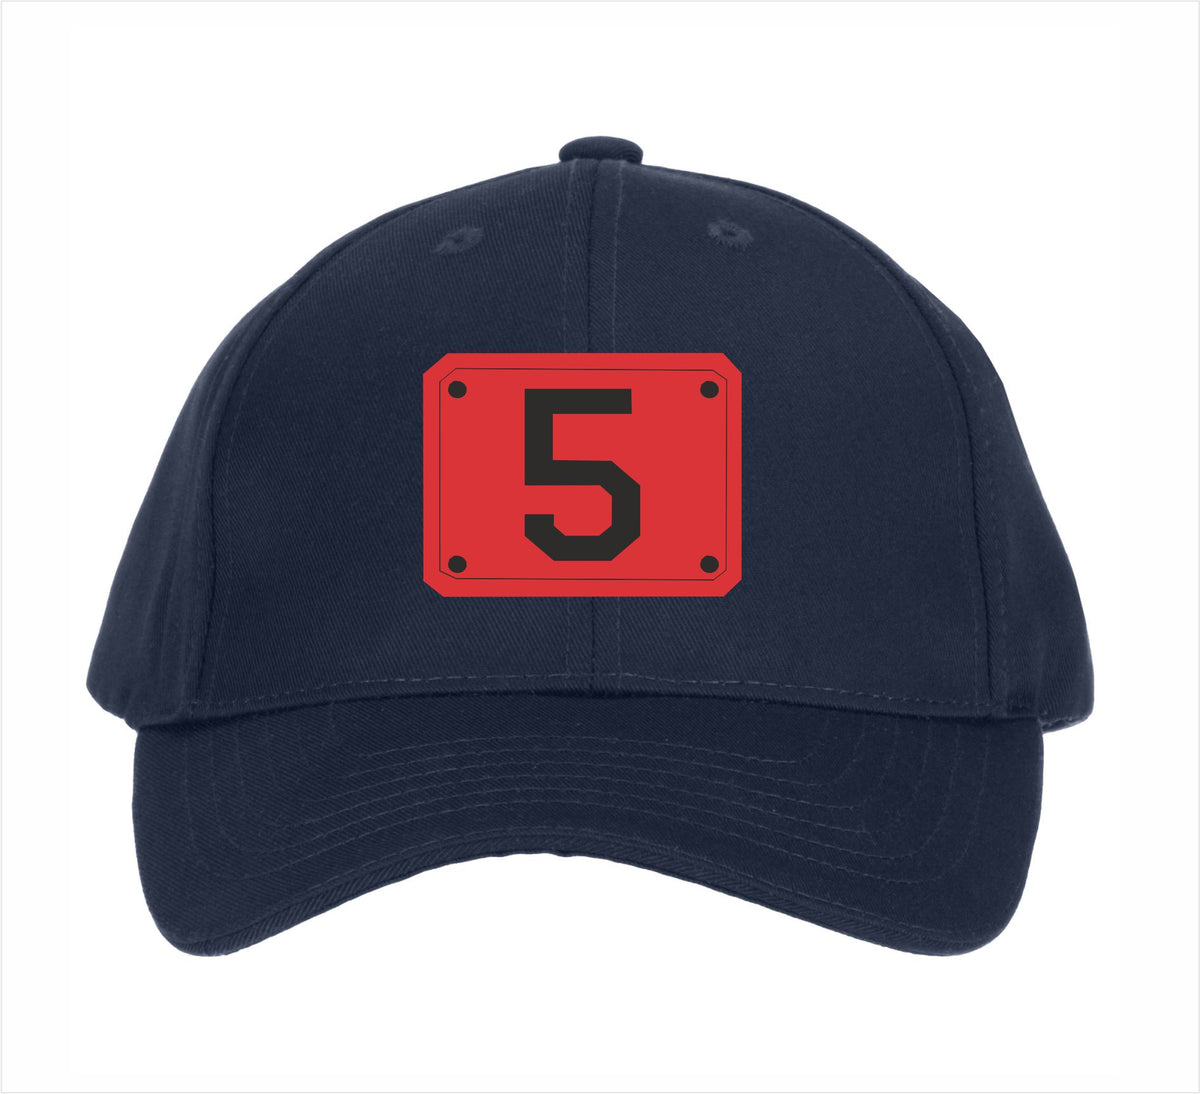 5 Red Custom Embroidered Badge Hat